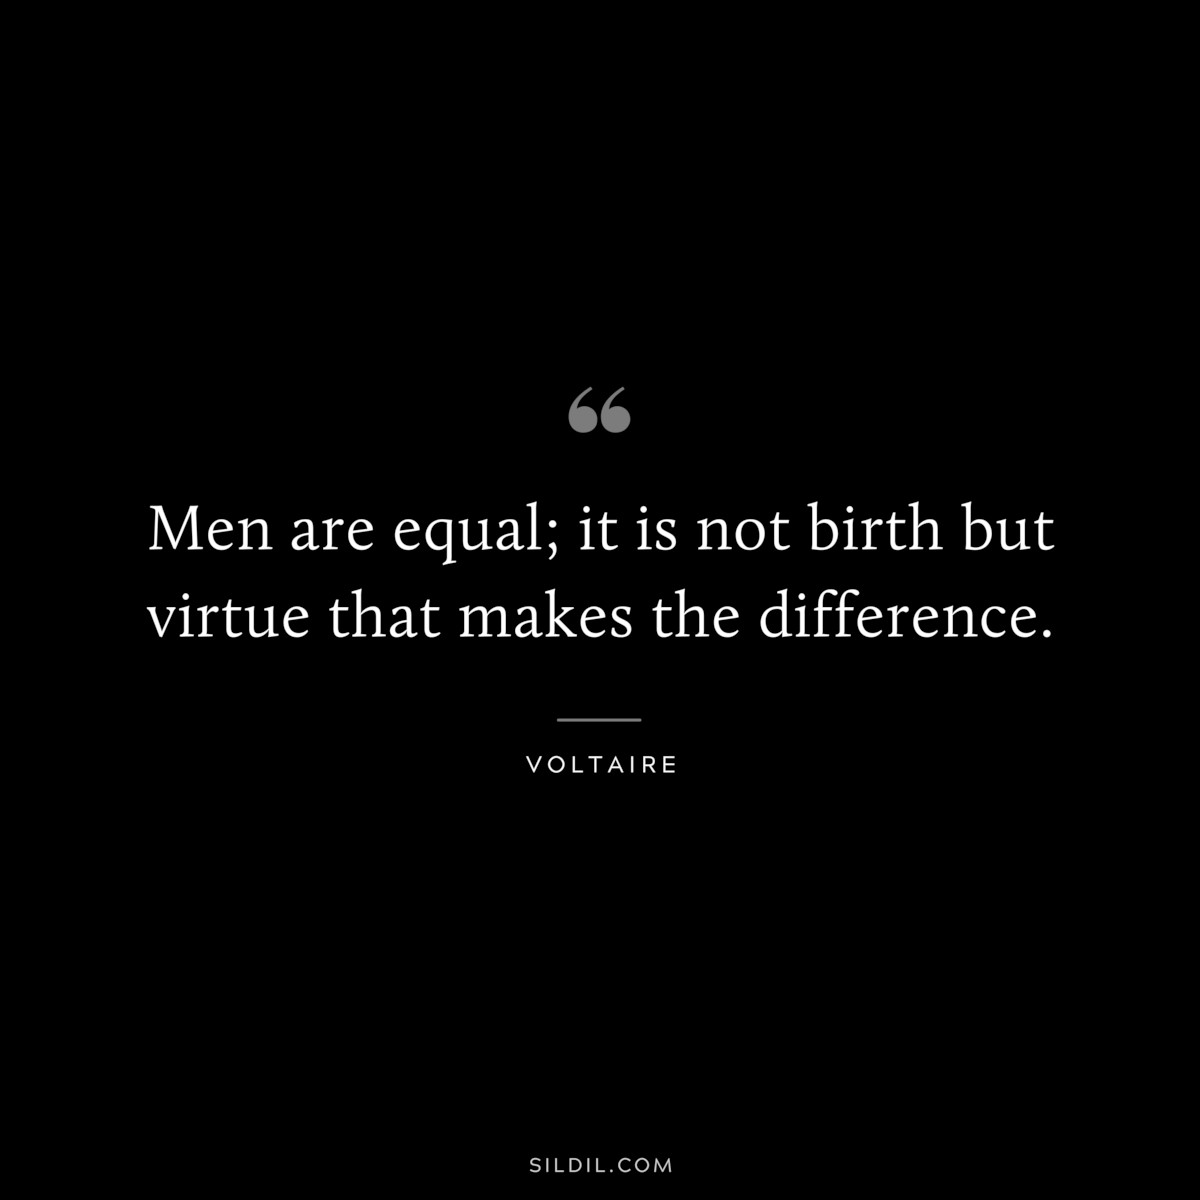 Men are equal; it is not birth but virtue that makes the difference. ― Voltaire